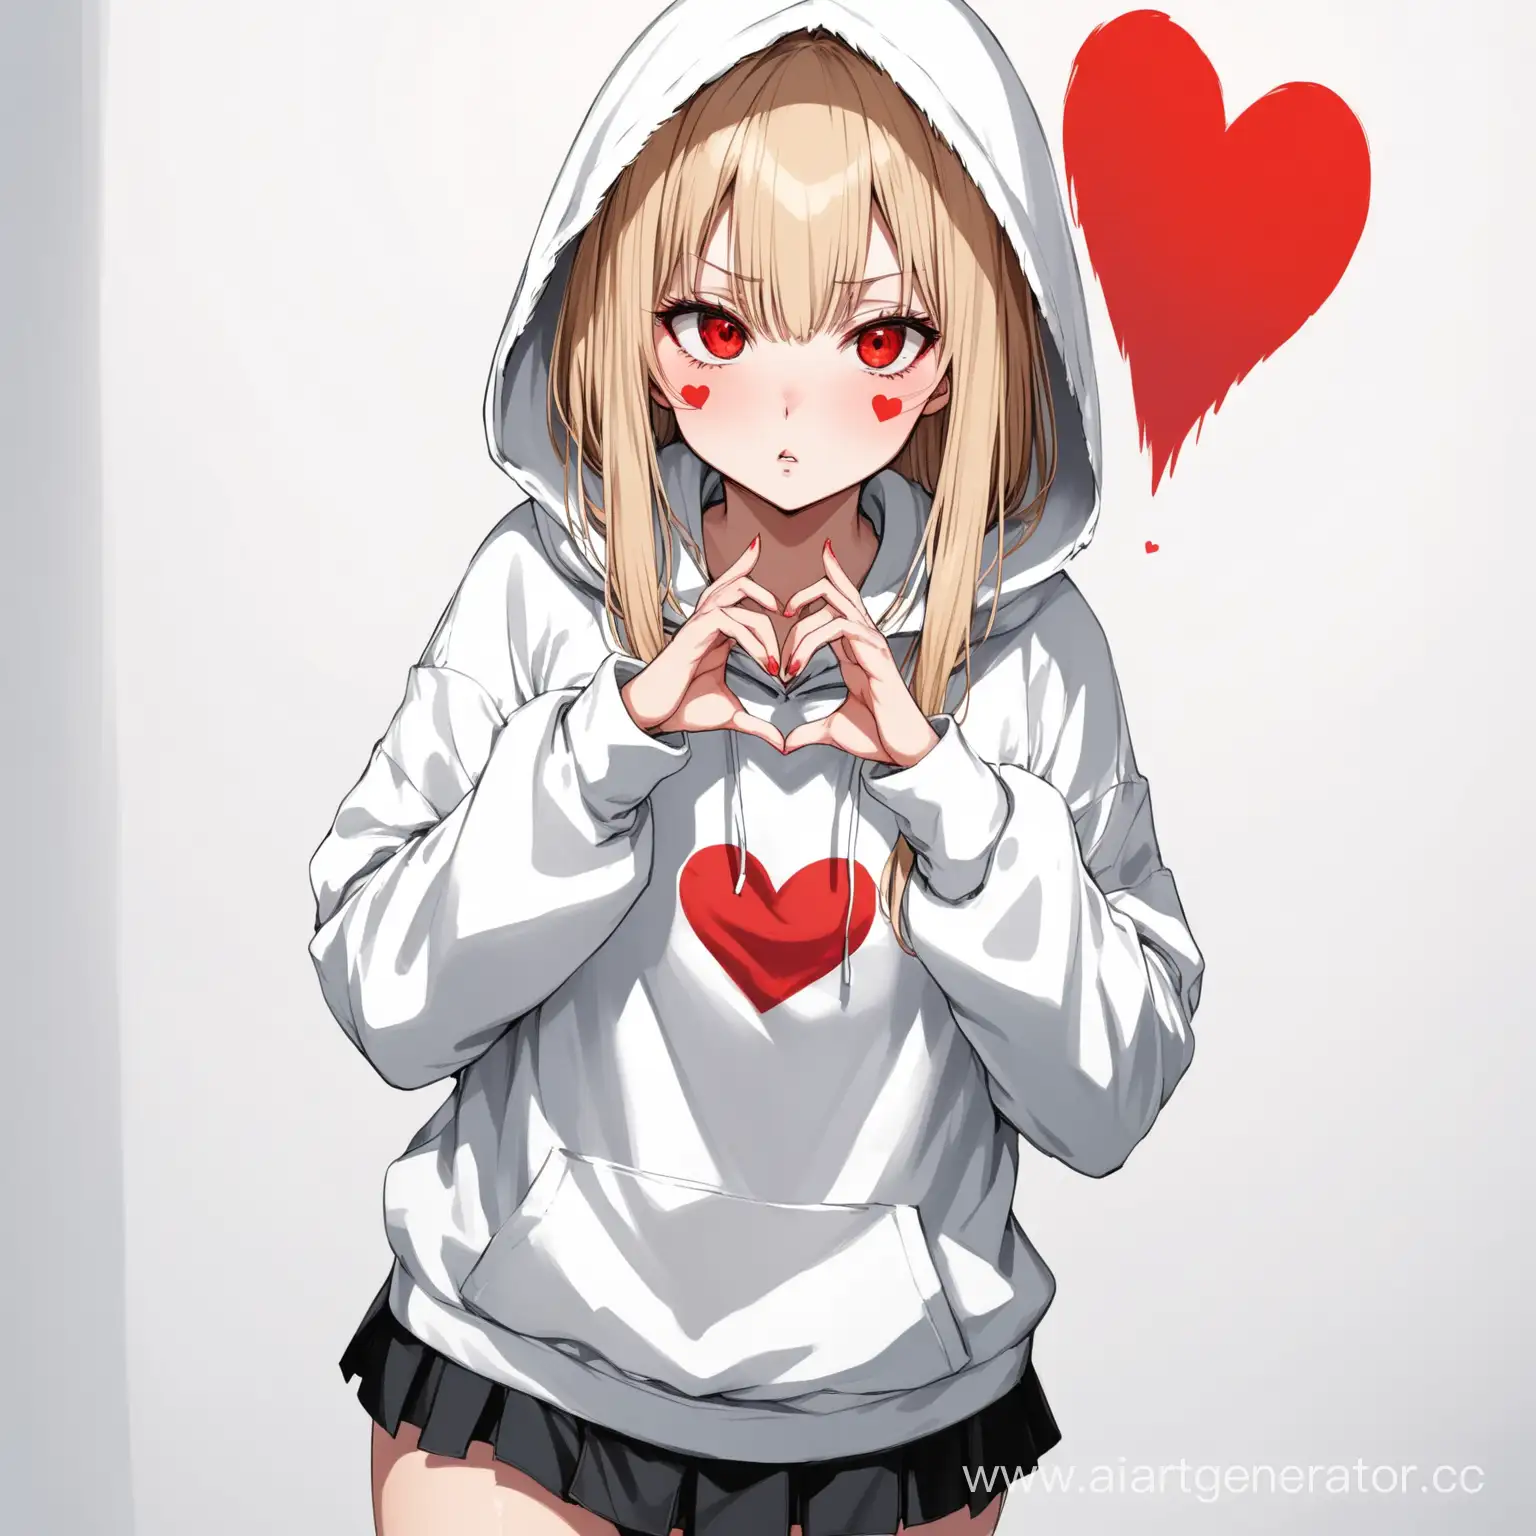 Unhappy-Girl-in-Oversized-White-Hoodie-and-Black-Skirt-Making-Heart-Gesture